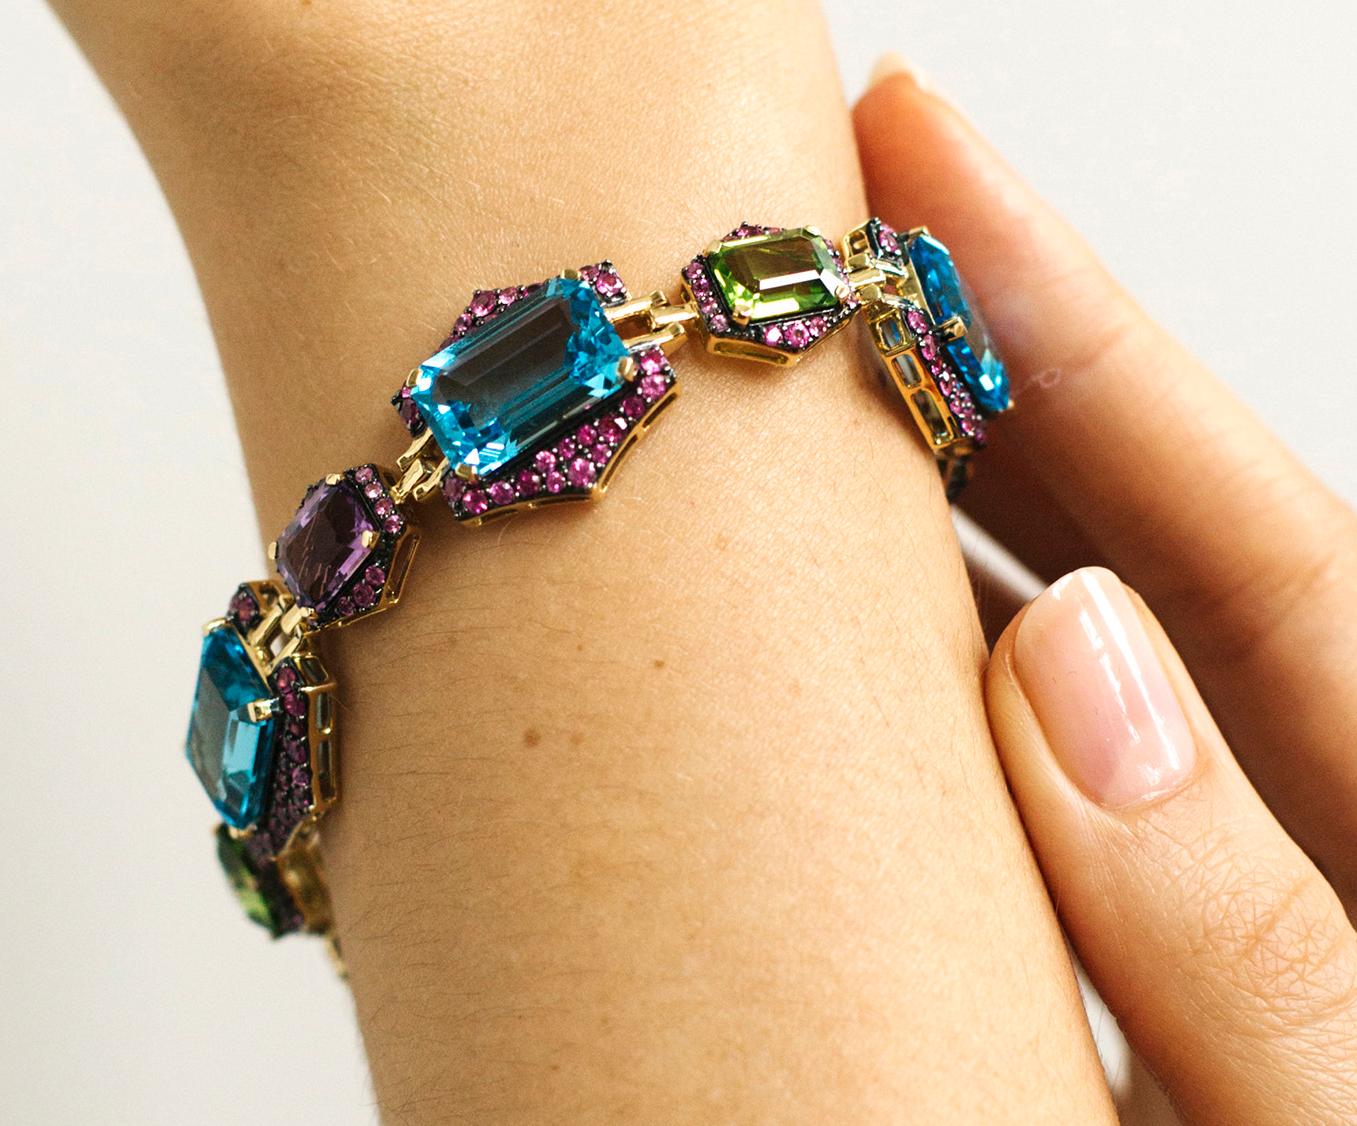 Blue Topaz, Peridot & Amethyst Bracelet with Pink Sapphires in 18K Yellow Gold, from 'Rain-Forest' Collection. Please allow 2-4 weeks for this item to be delivered.

Bracelet Length: 7 1/2